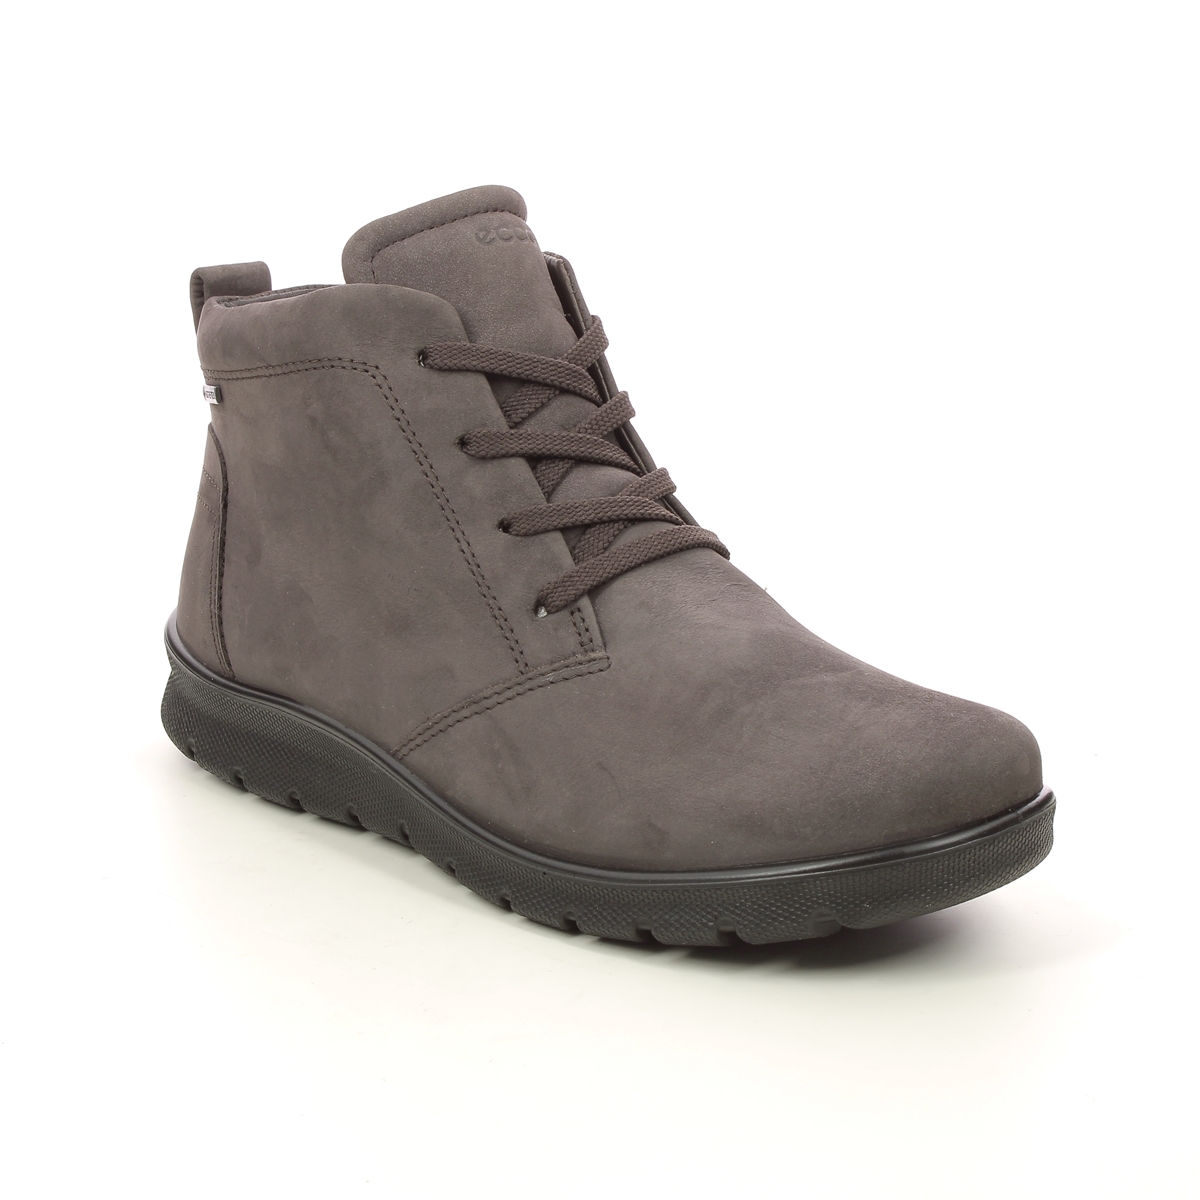 ECCO Babett Lo Gtx Brown nubuck Womens Lace Up Boots 215583-02576 in a Plain Leather in Size 39